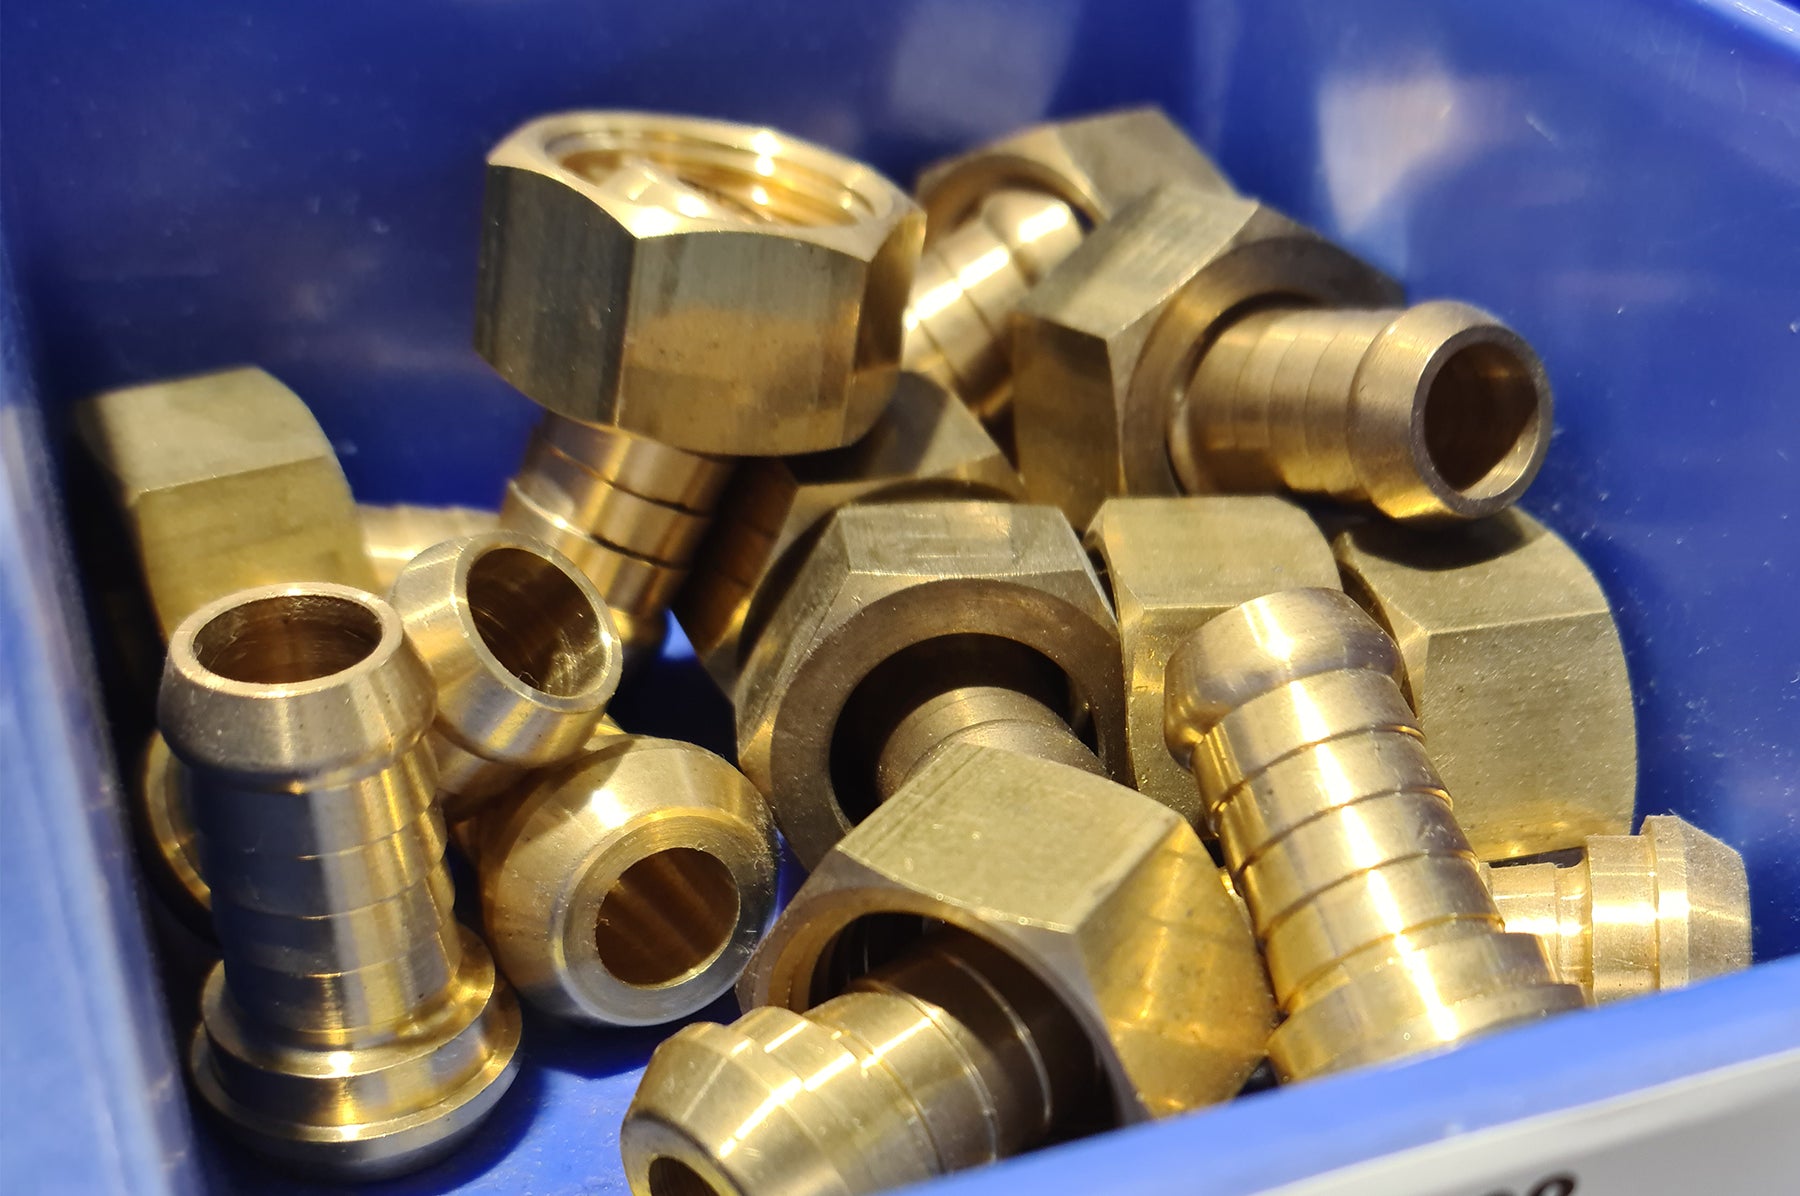 Brass fittings in a blue display case. 